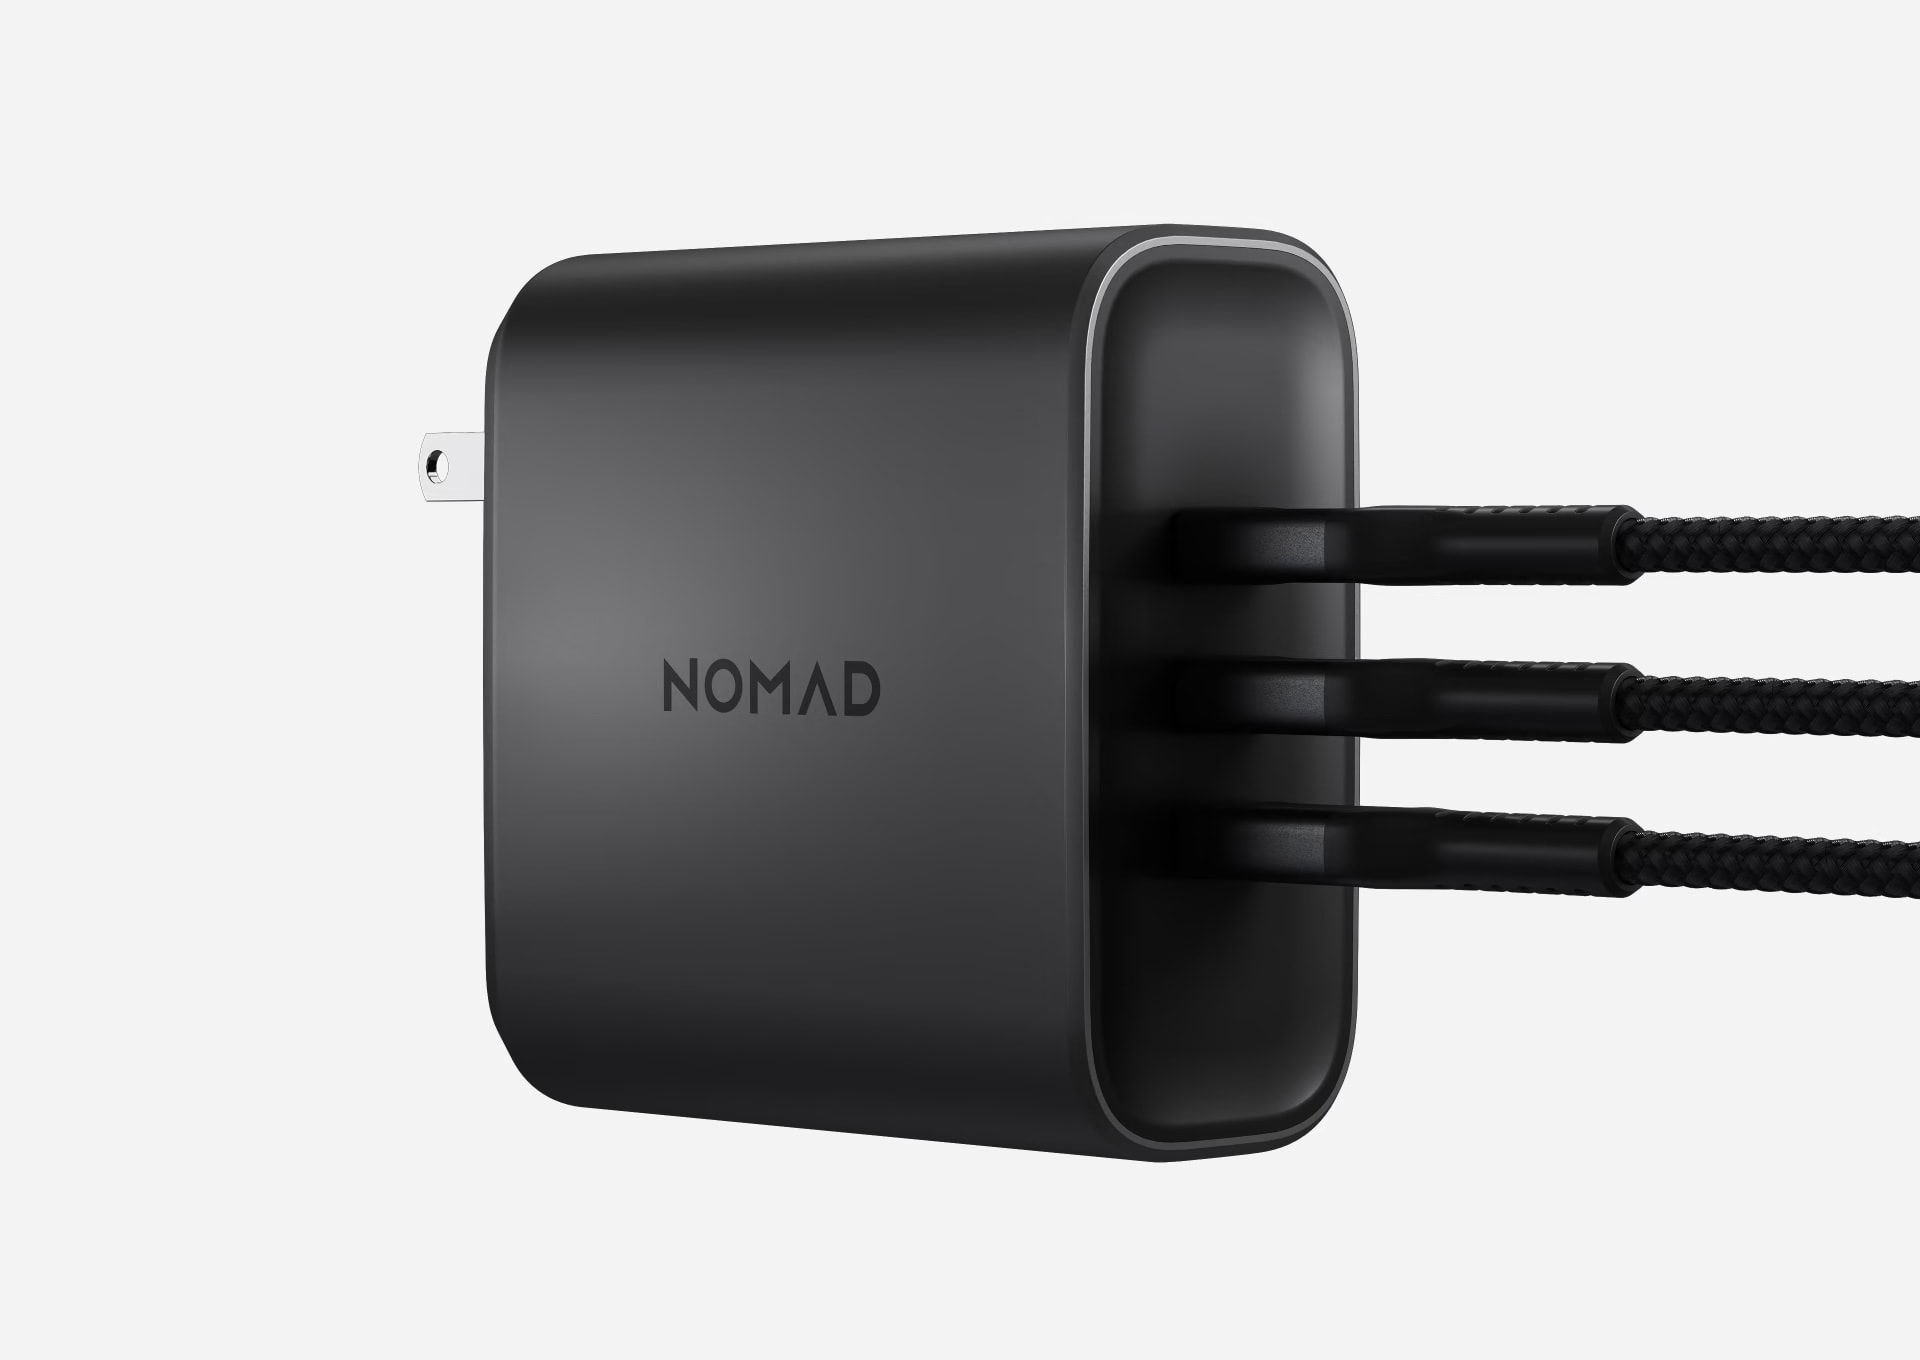 Nomad's new GaN charger powers up 3 devices quickly